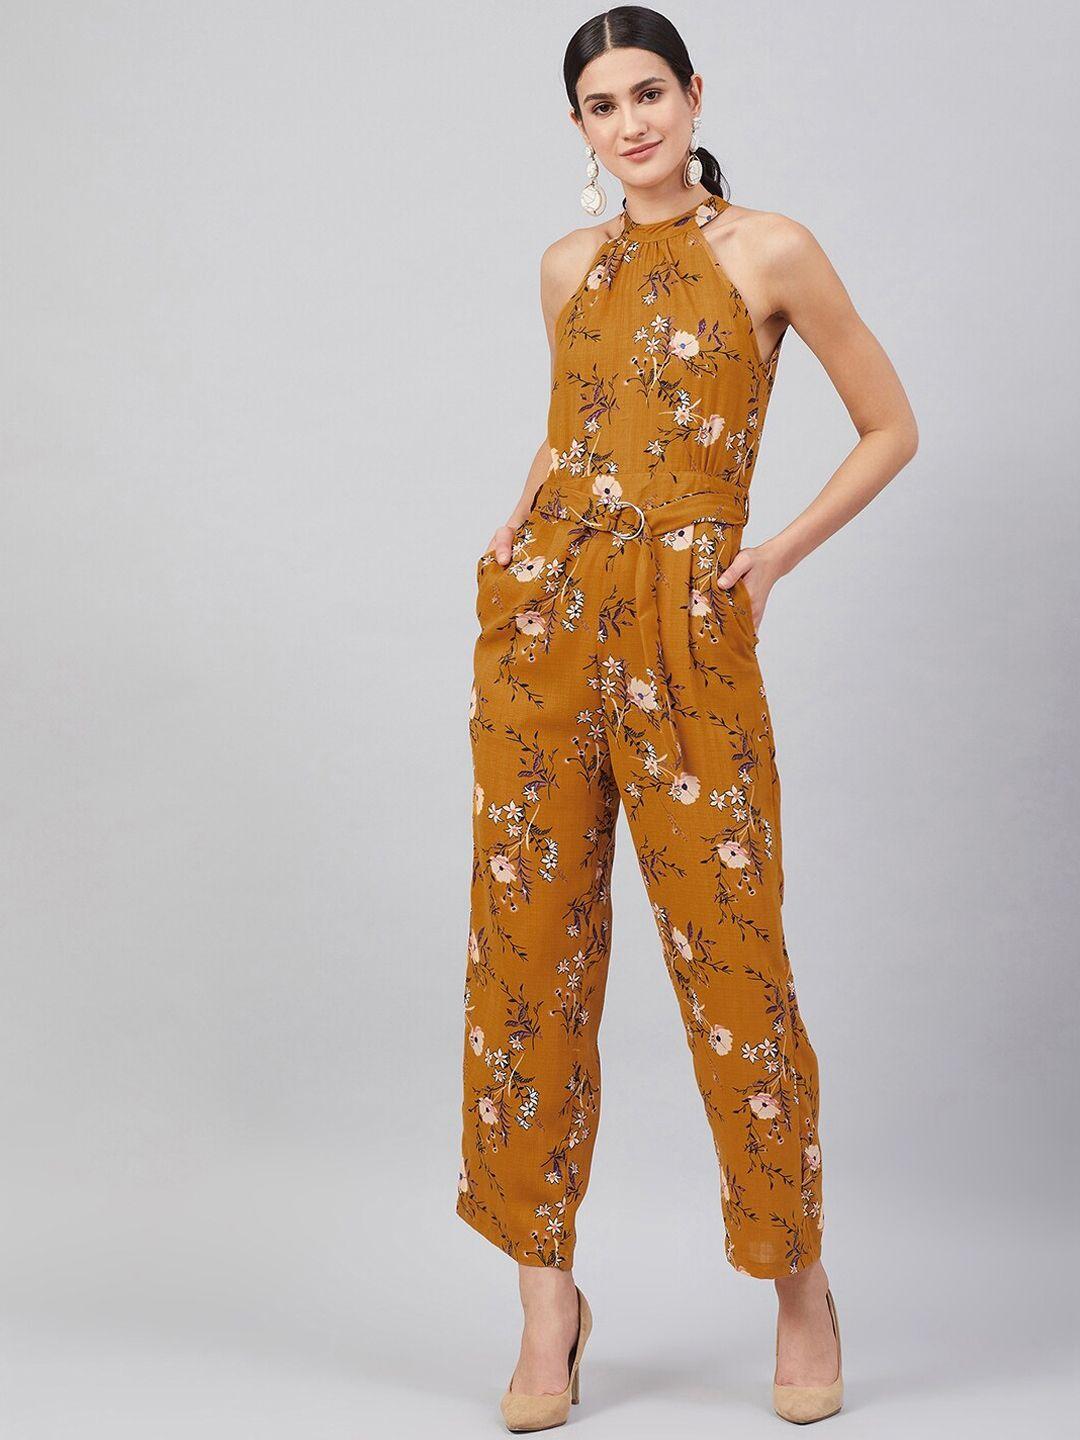 marie-claire-women-mustard-yellow-&-pink-floral-printed-basic-jumpsuit